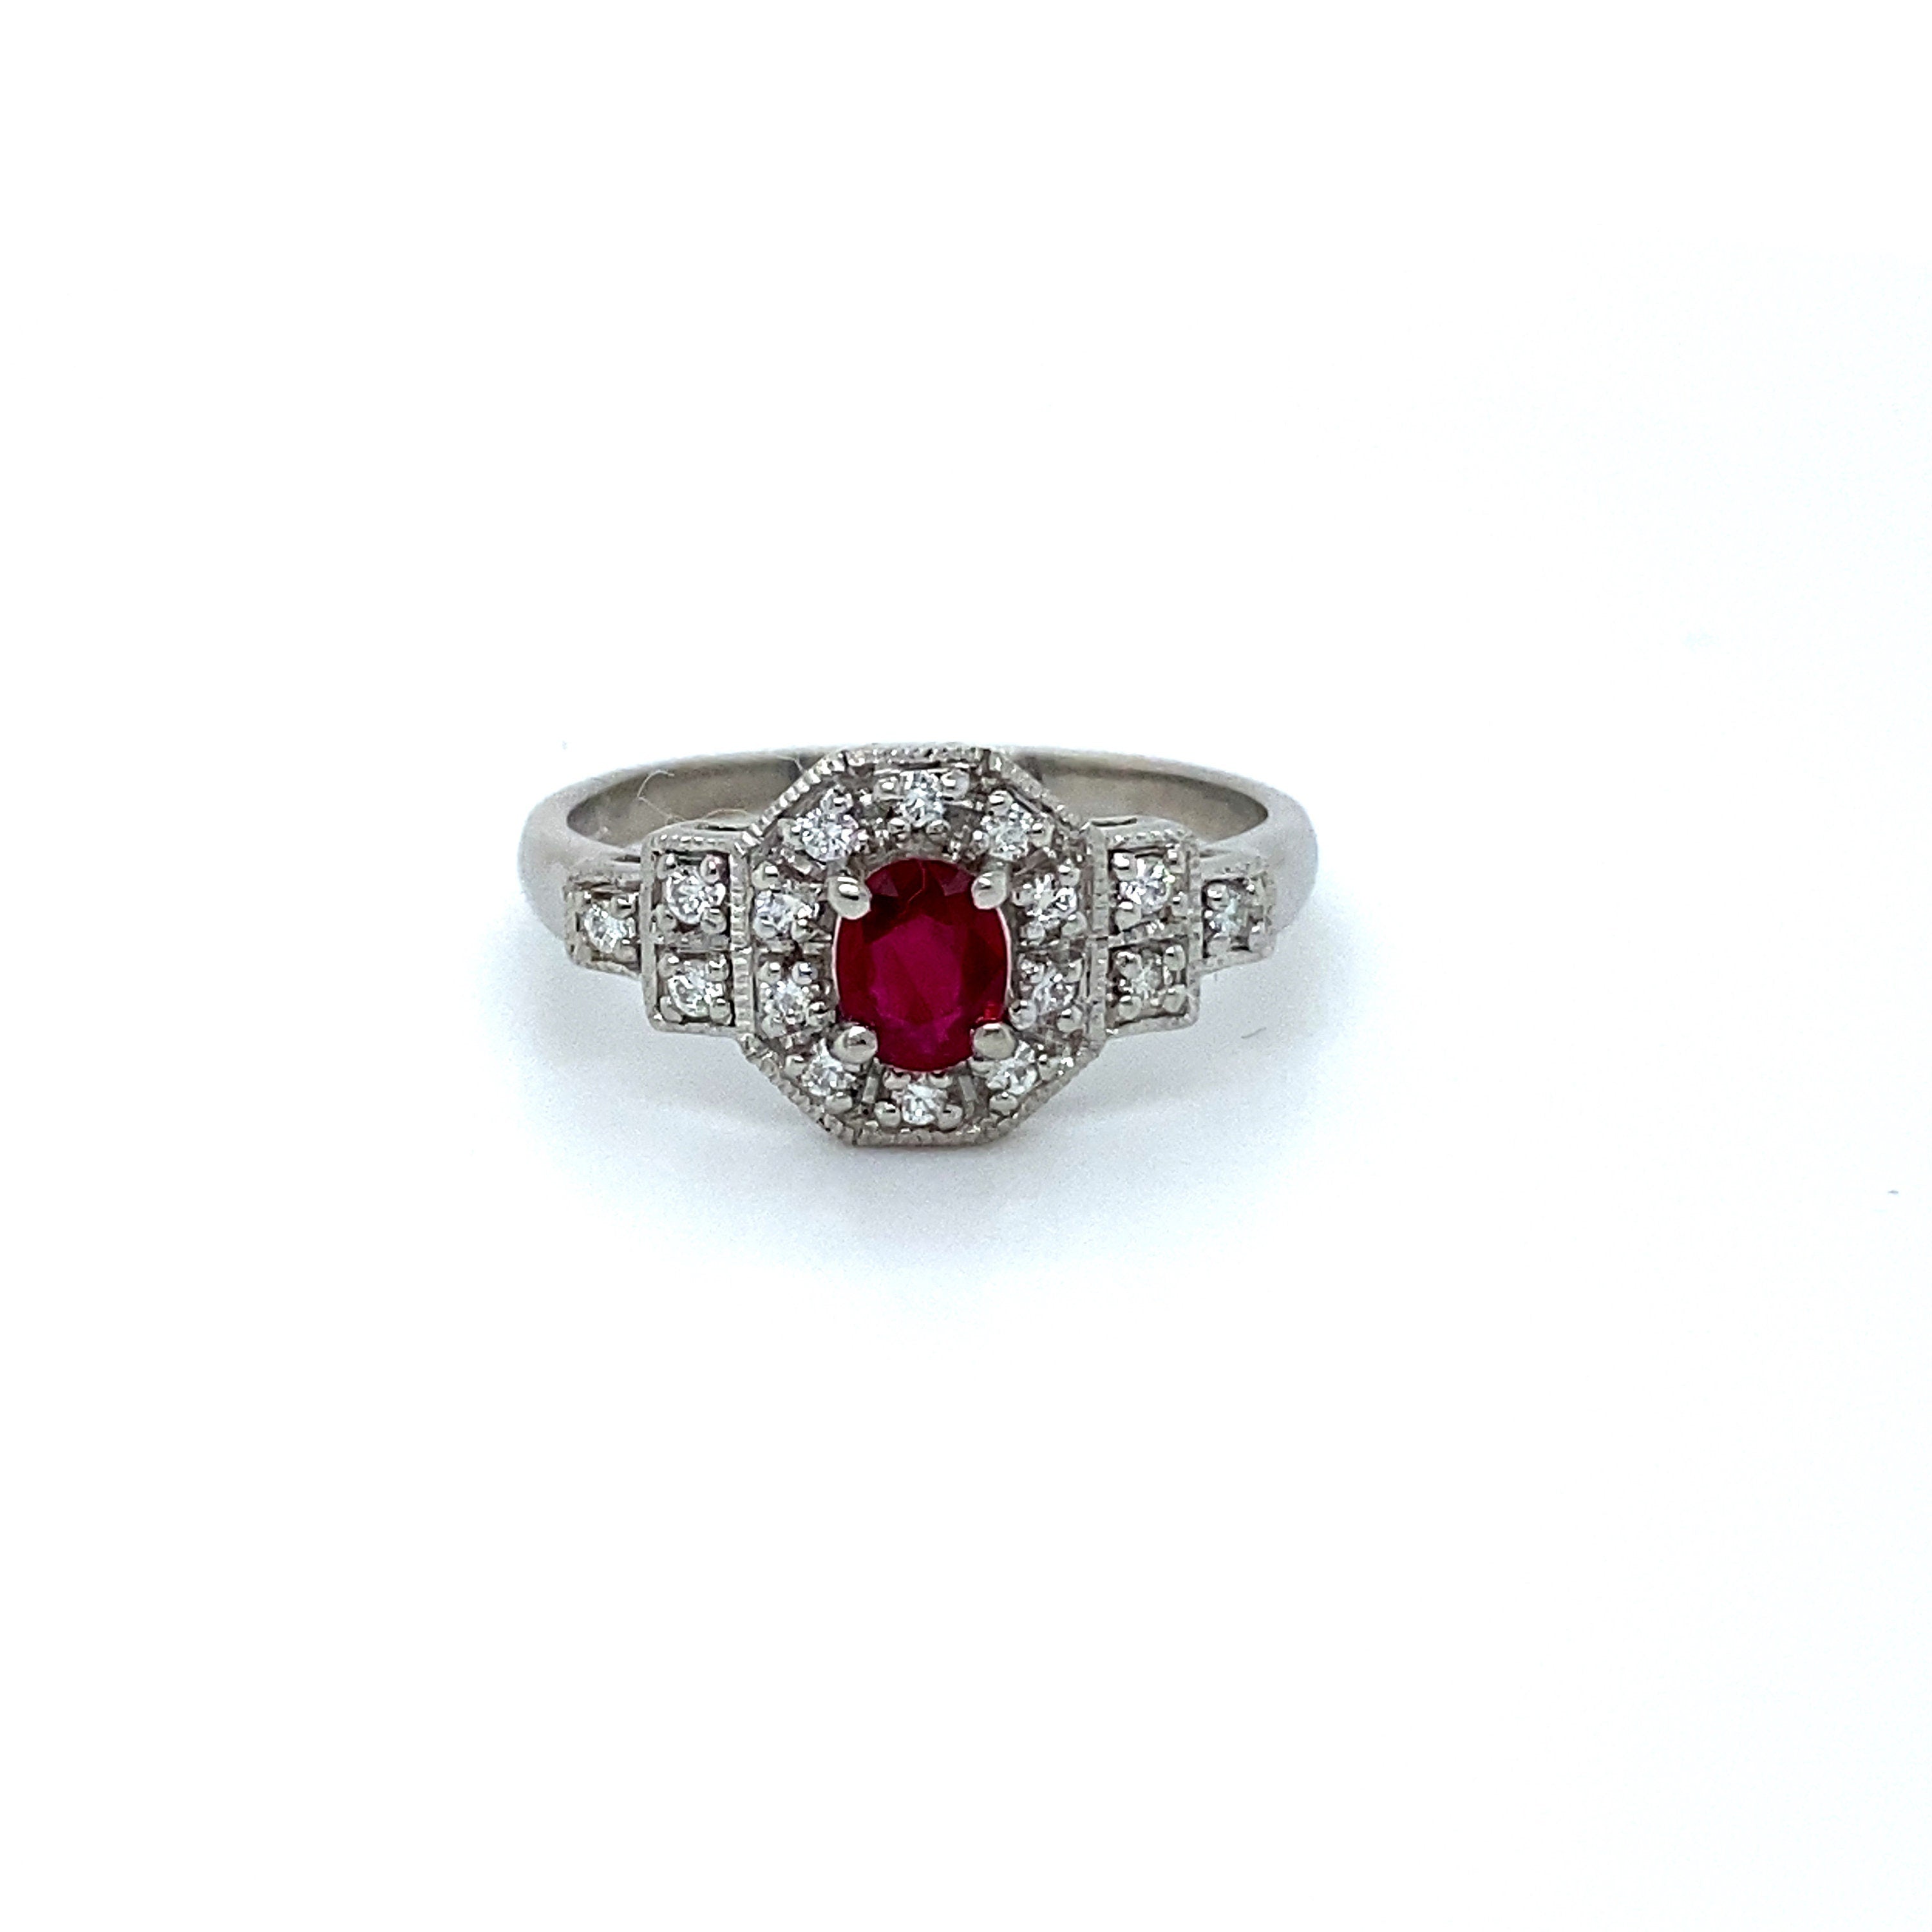 Lovely Art Deco Platinum Diamond and Ruby Ring Engagement Ring Wedding Ring- 0.82ct.